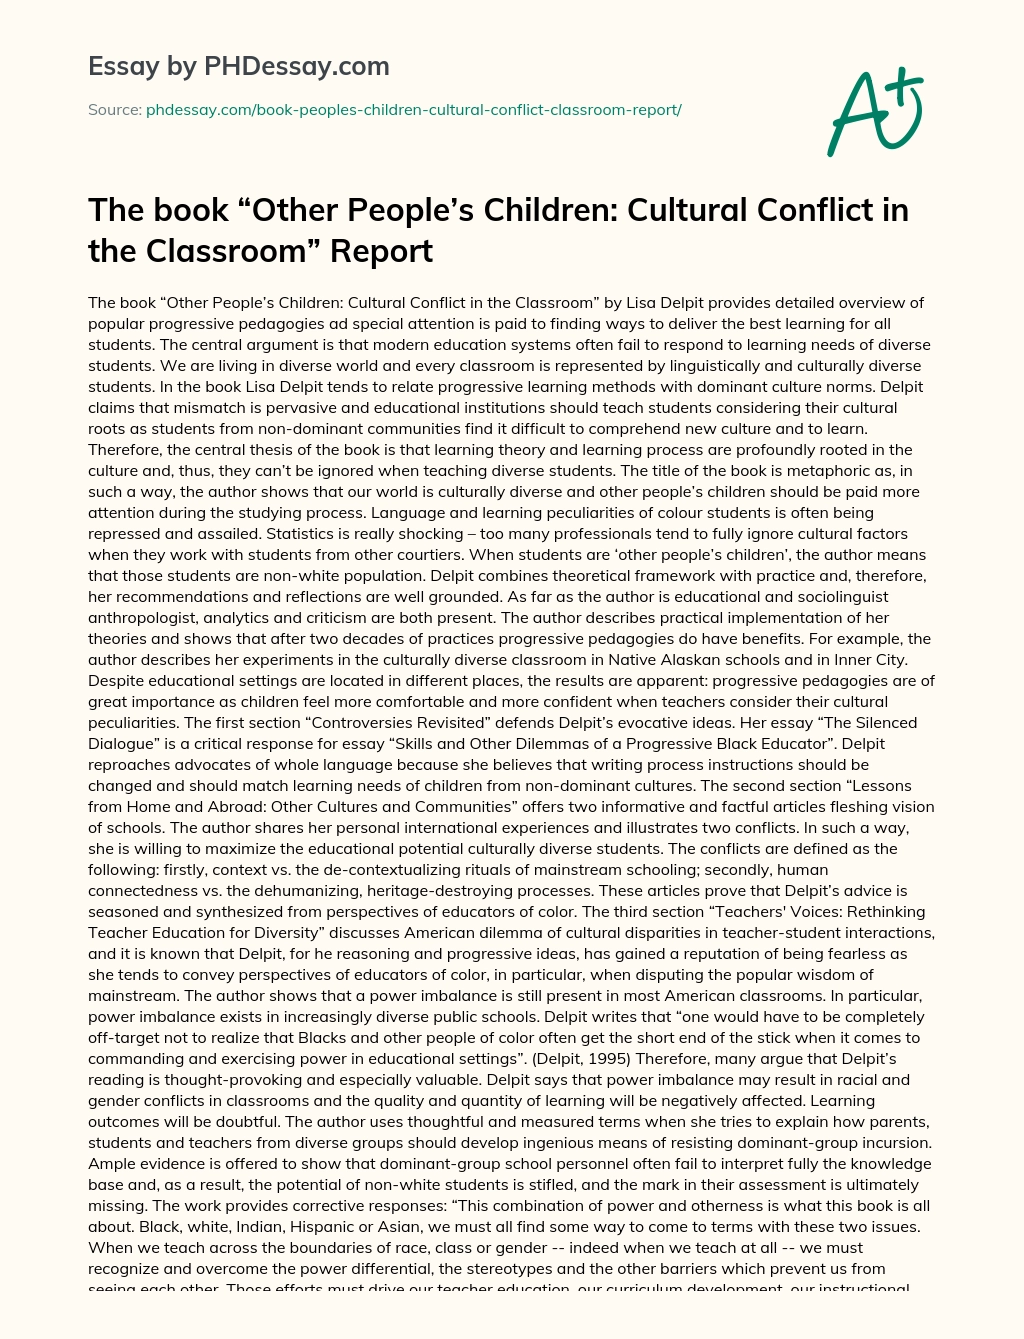 The book “Other People’s Children: Cultural Conflict in the Classroom” Report essay